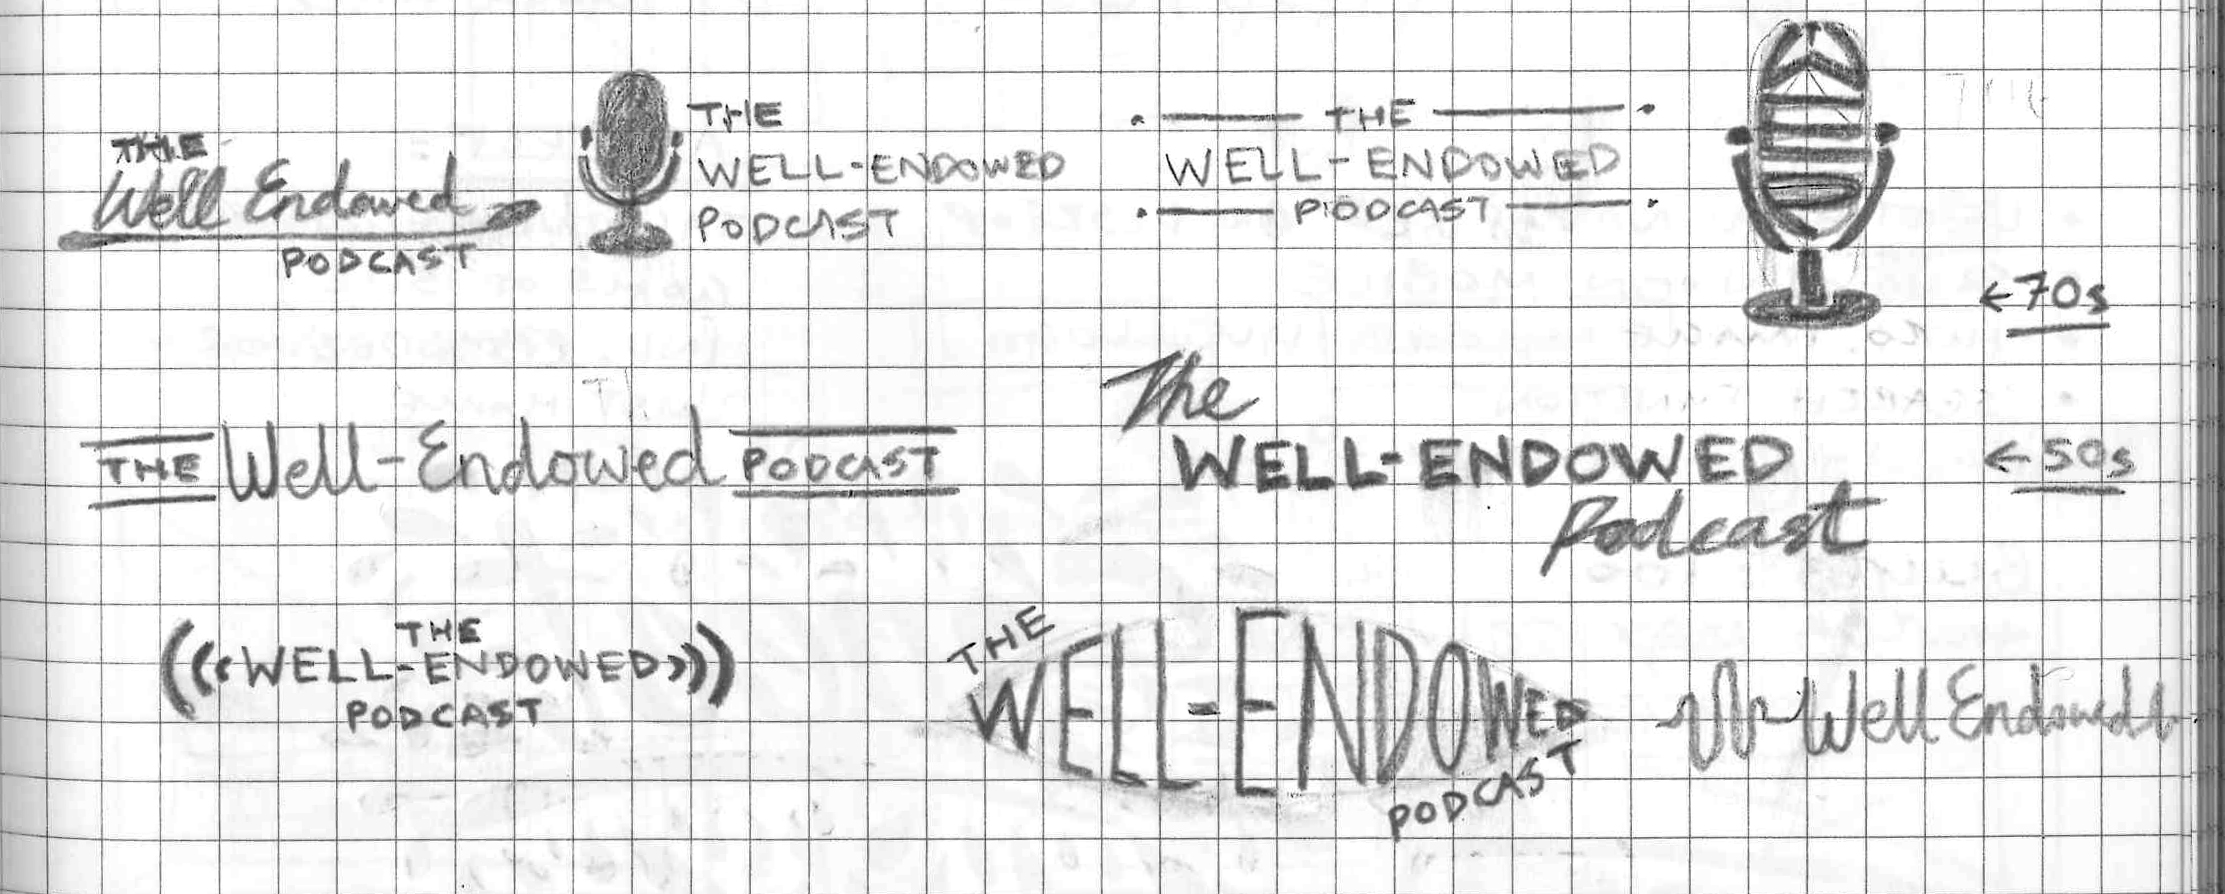 Concept sketches for the Well Endowed Podcast's logo.